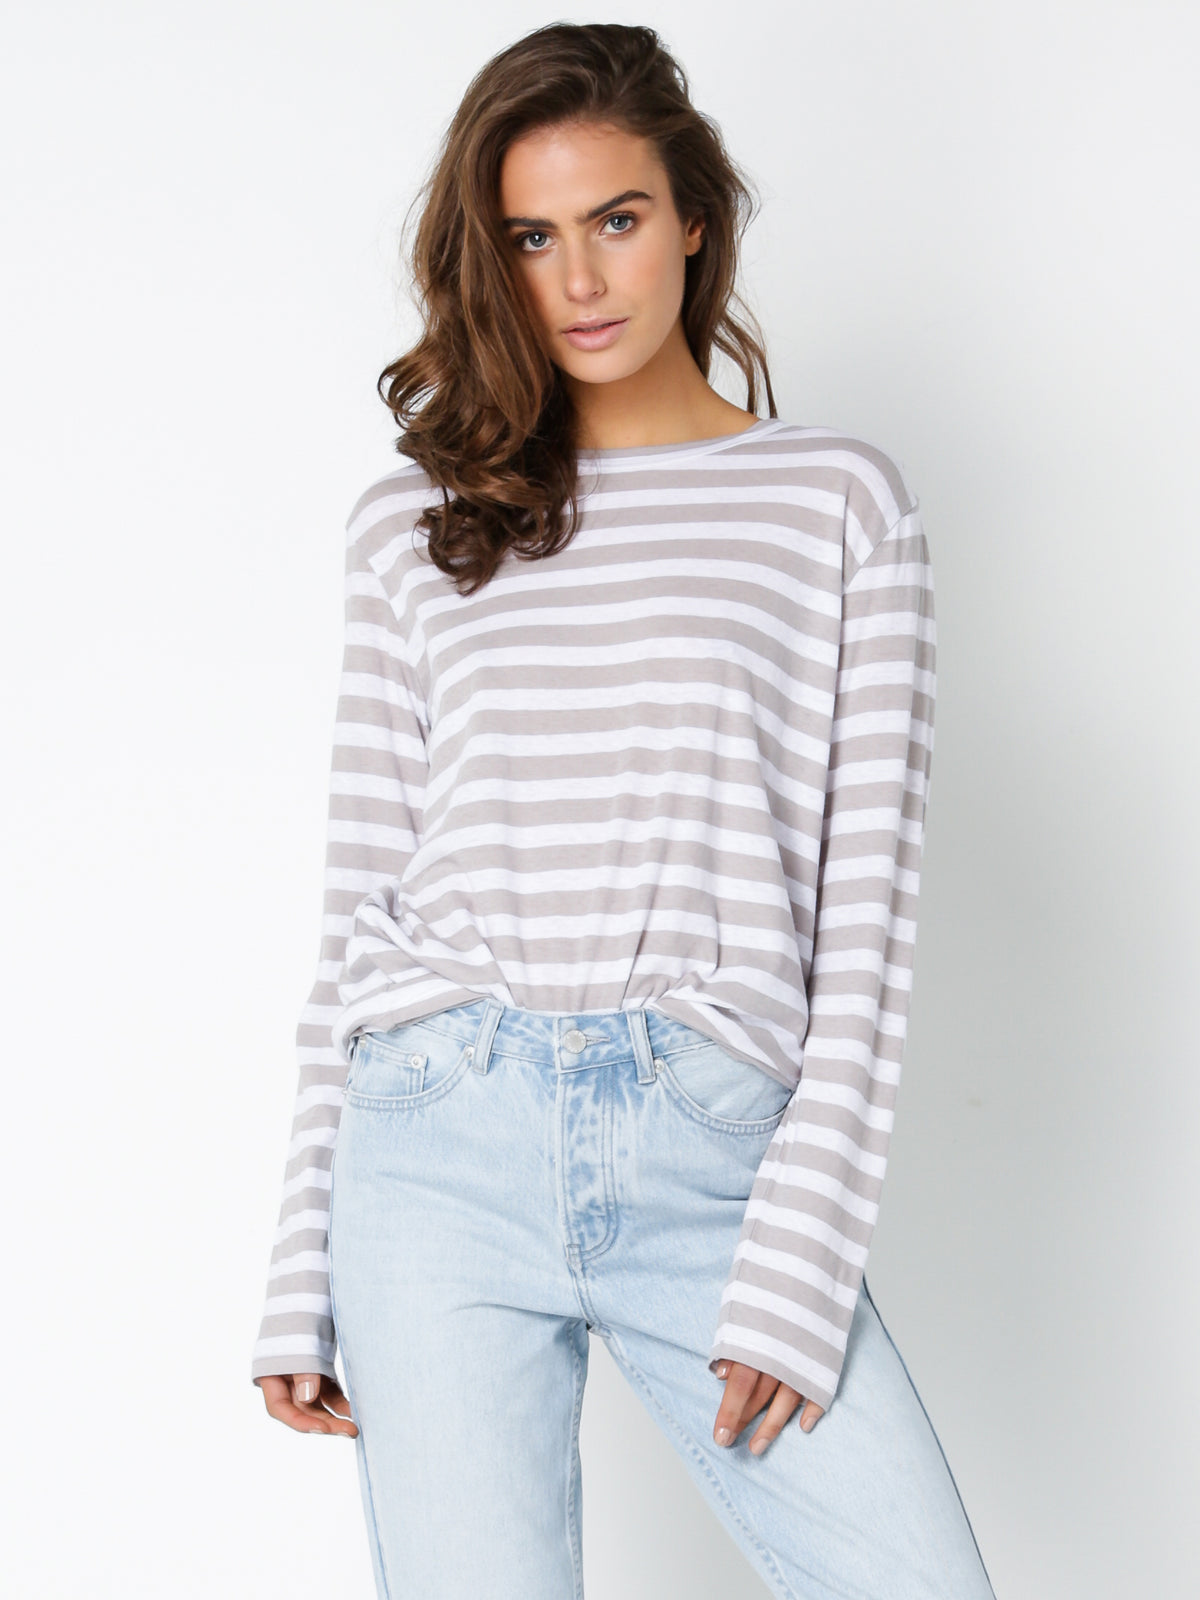 Bay Long Sleeve T-Shirt in White and Grey Stripe